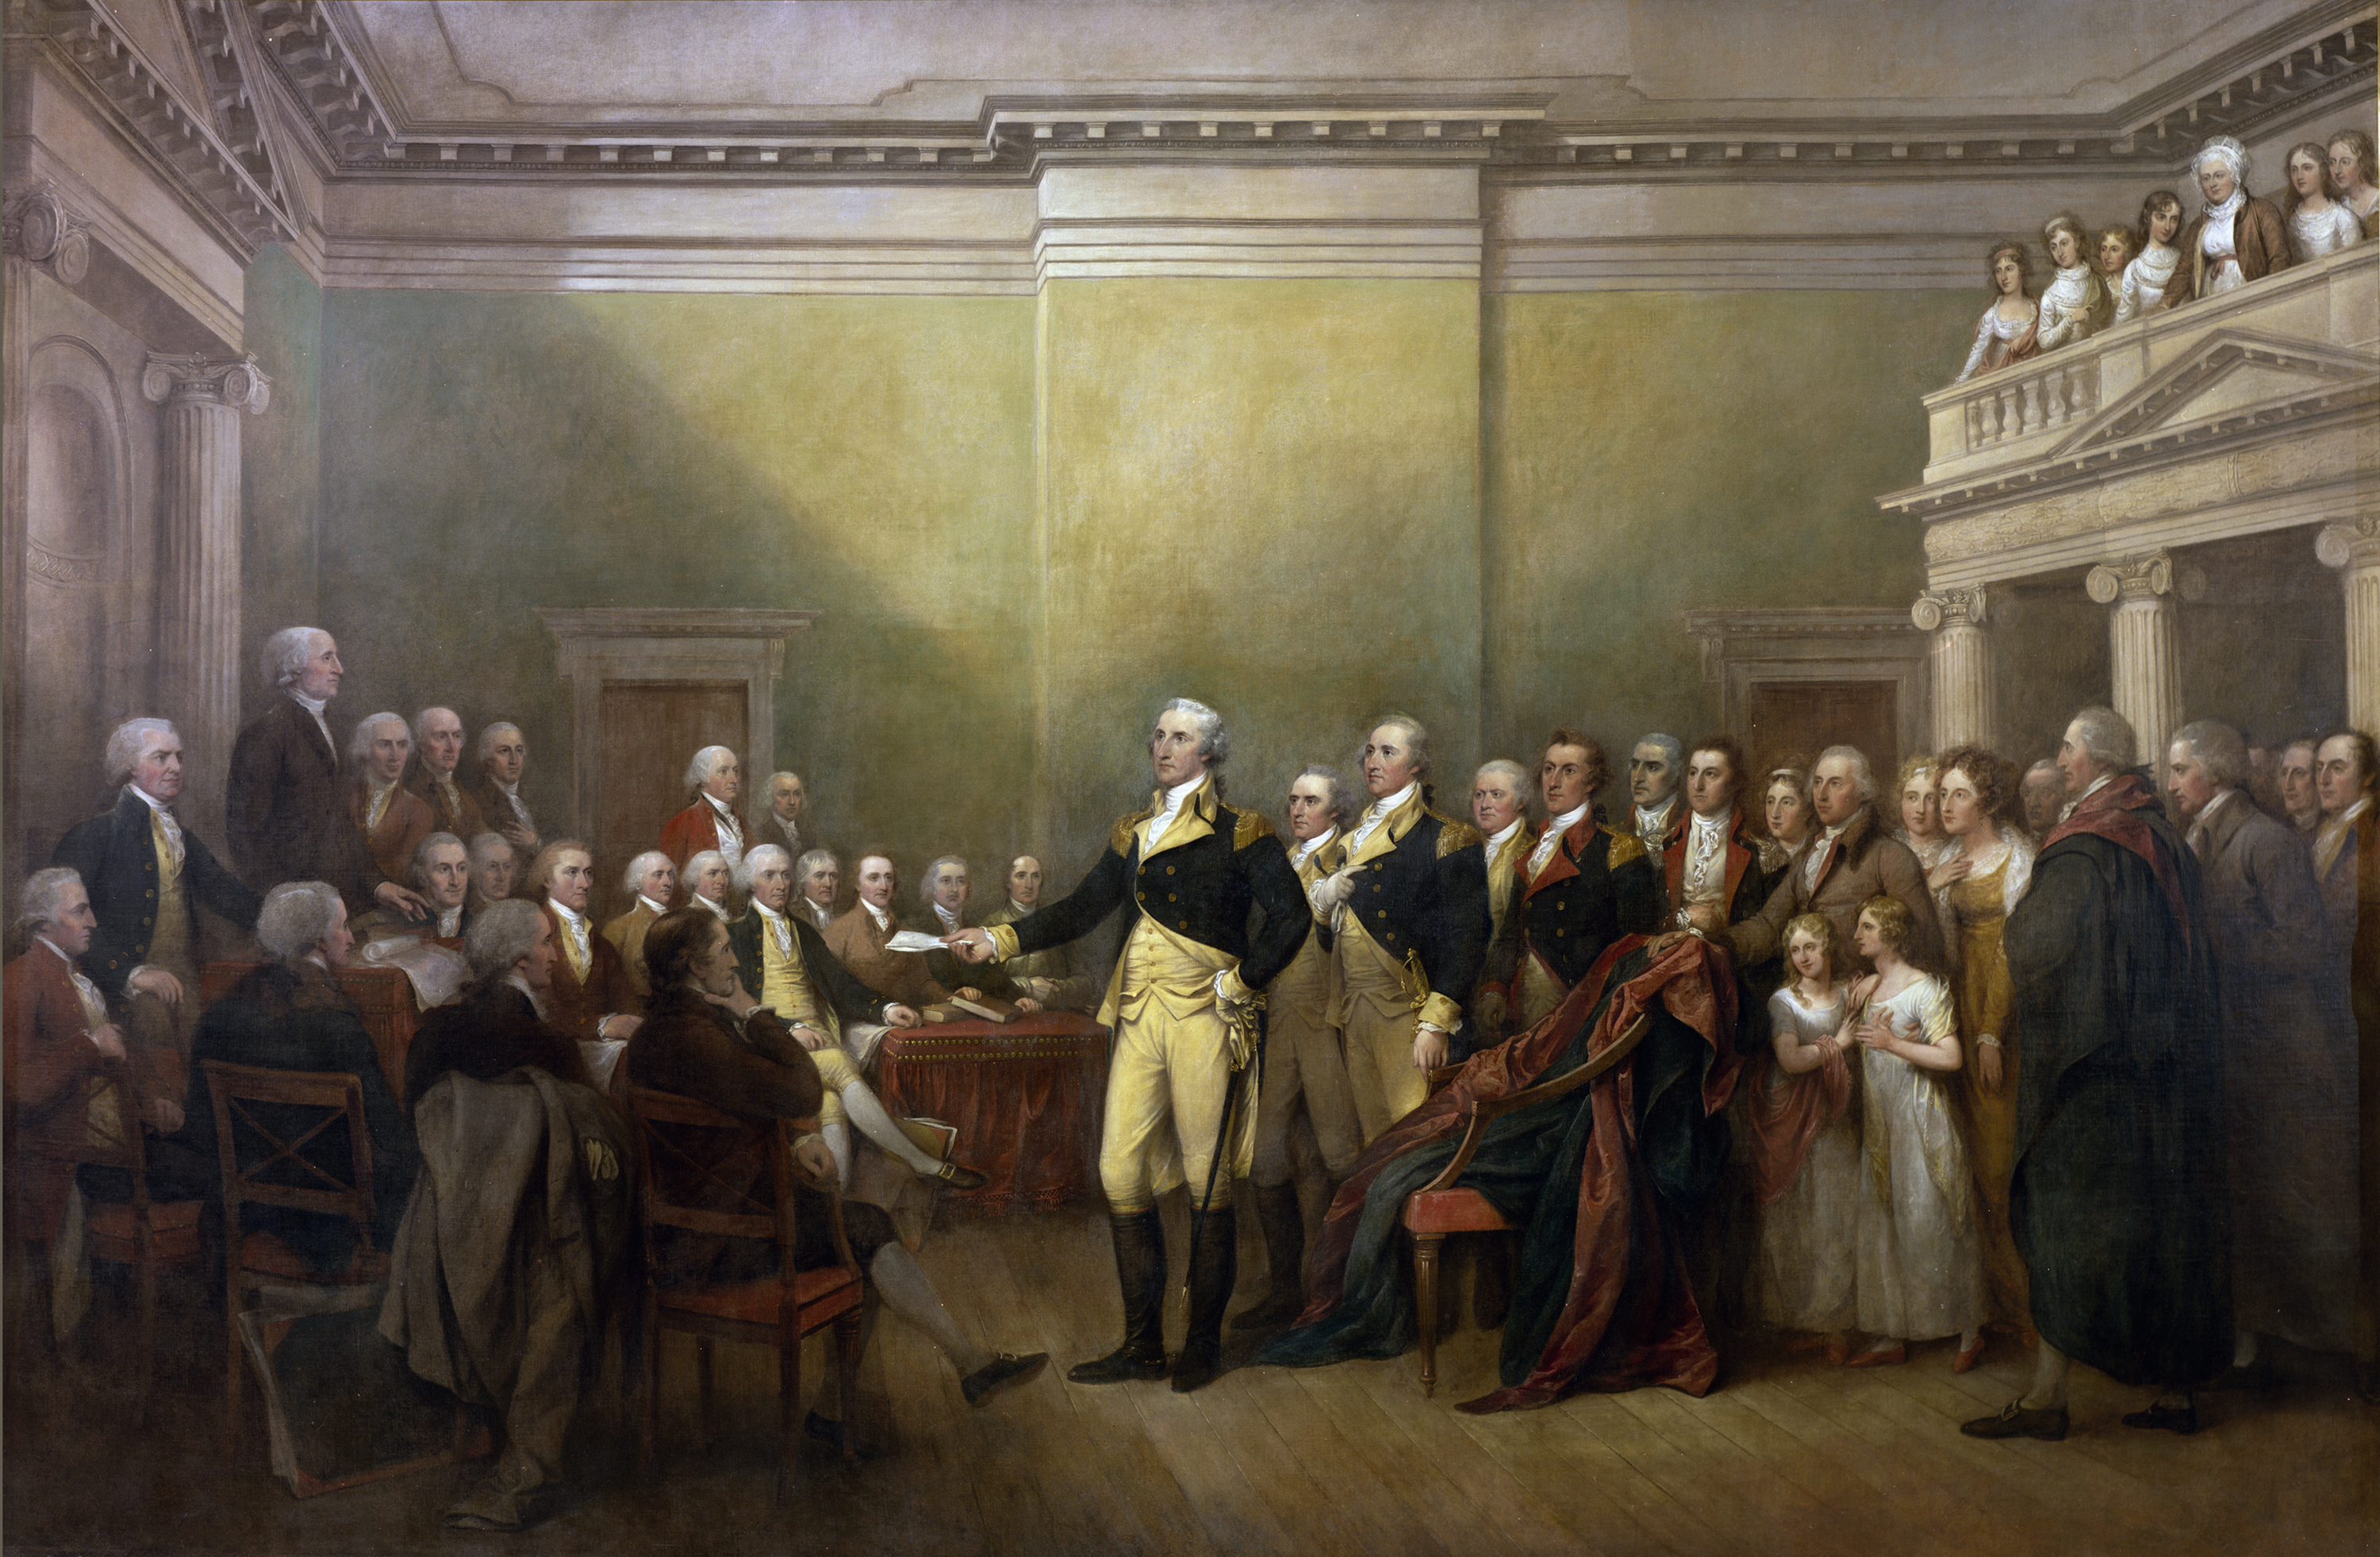 George Washington's resignation as commander-in-chief